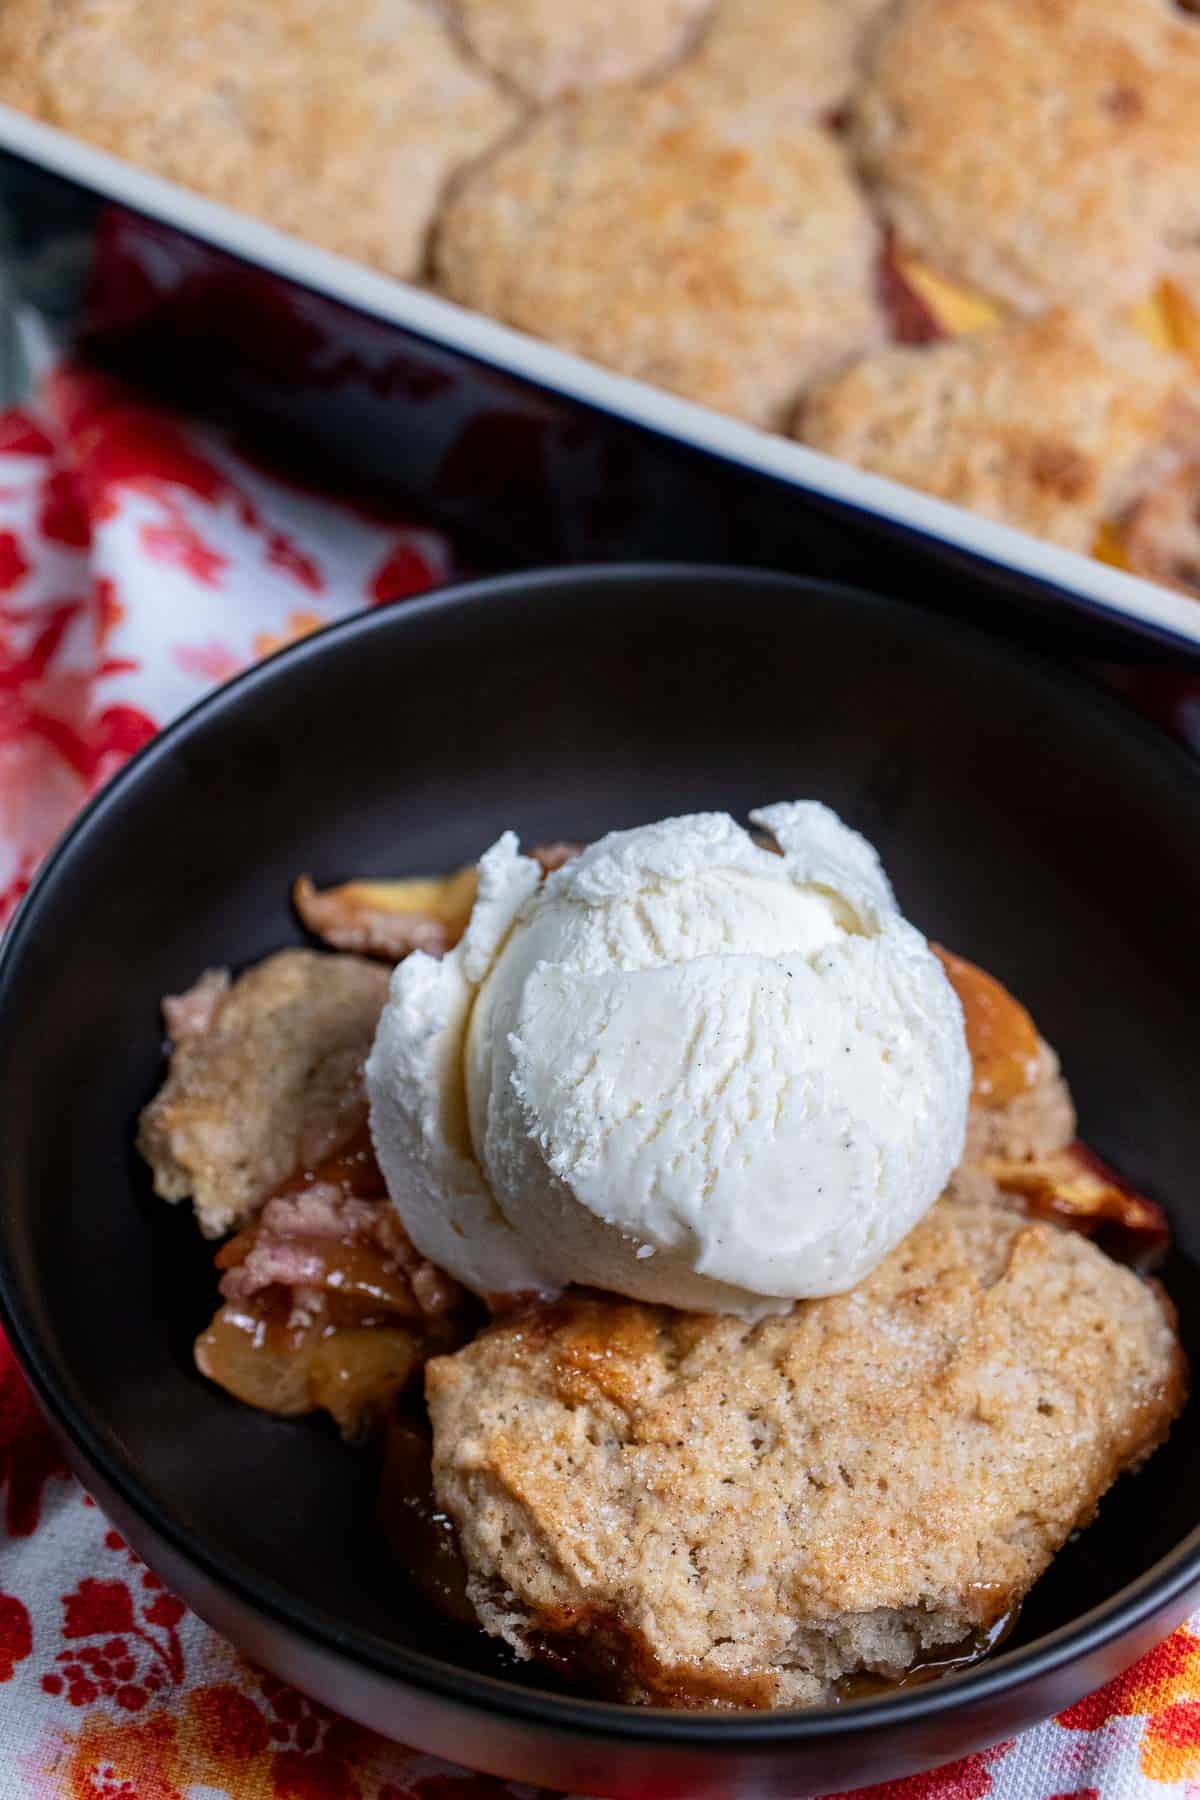 Biscuit topped peach cobbler in a baking dish, with a black bowl of peach cobbler topped with ice cream in front.